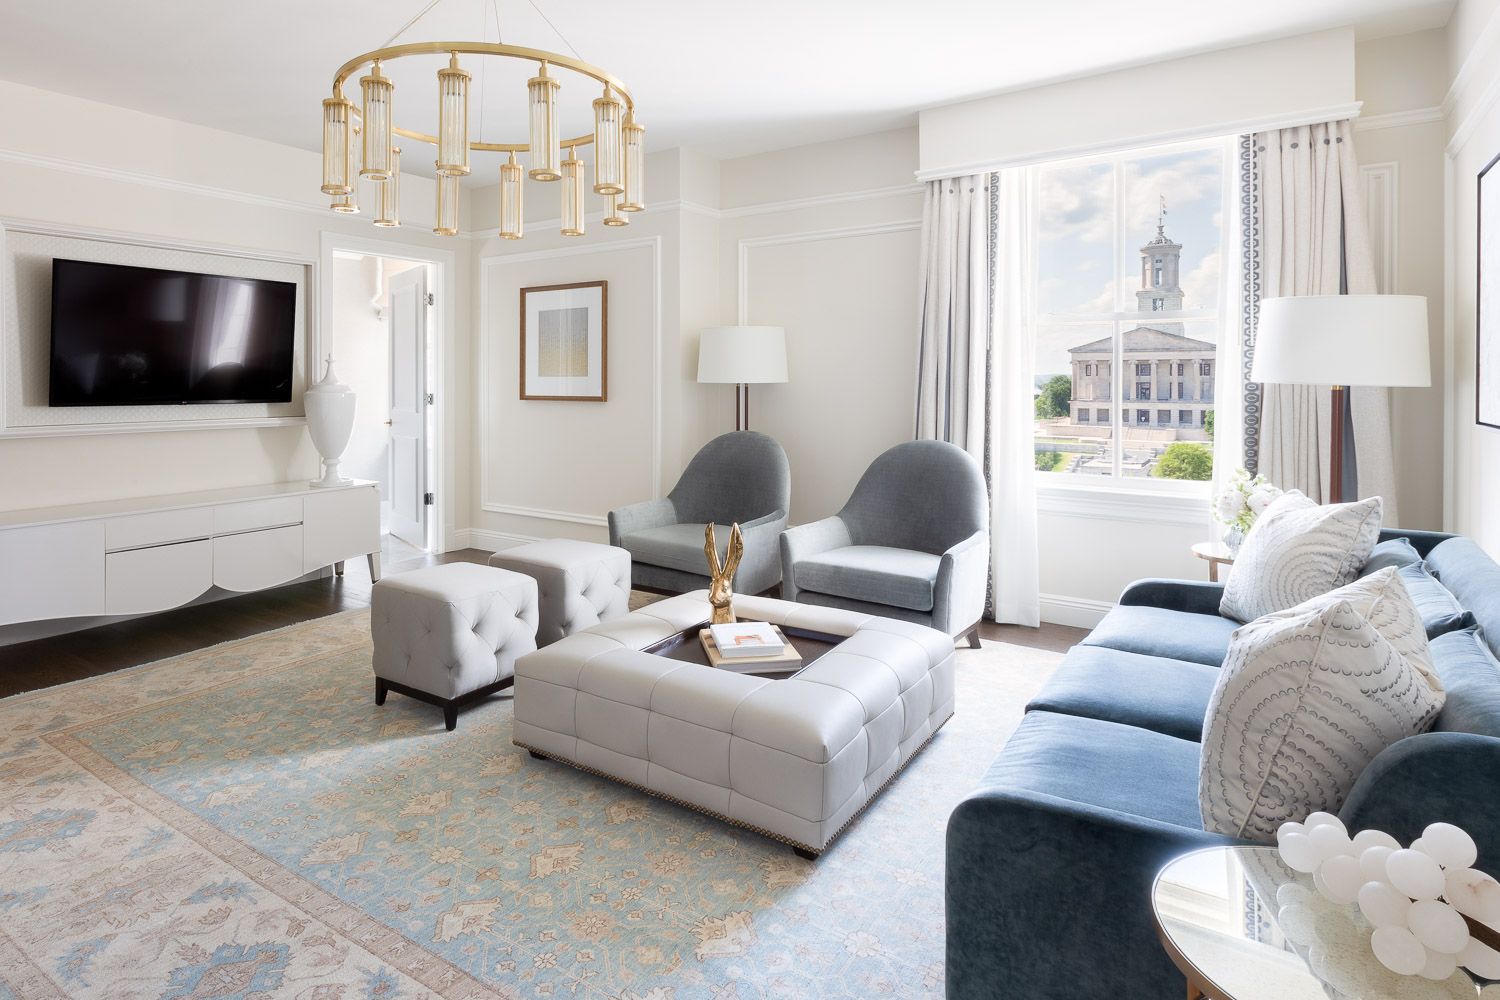 The Hermitage Hotel Executive Suite